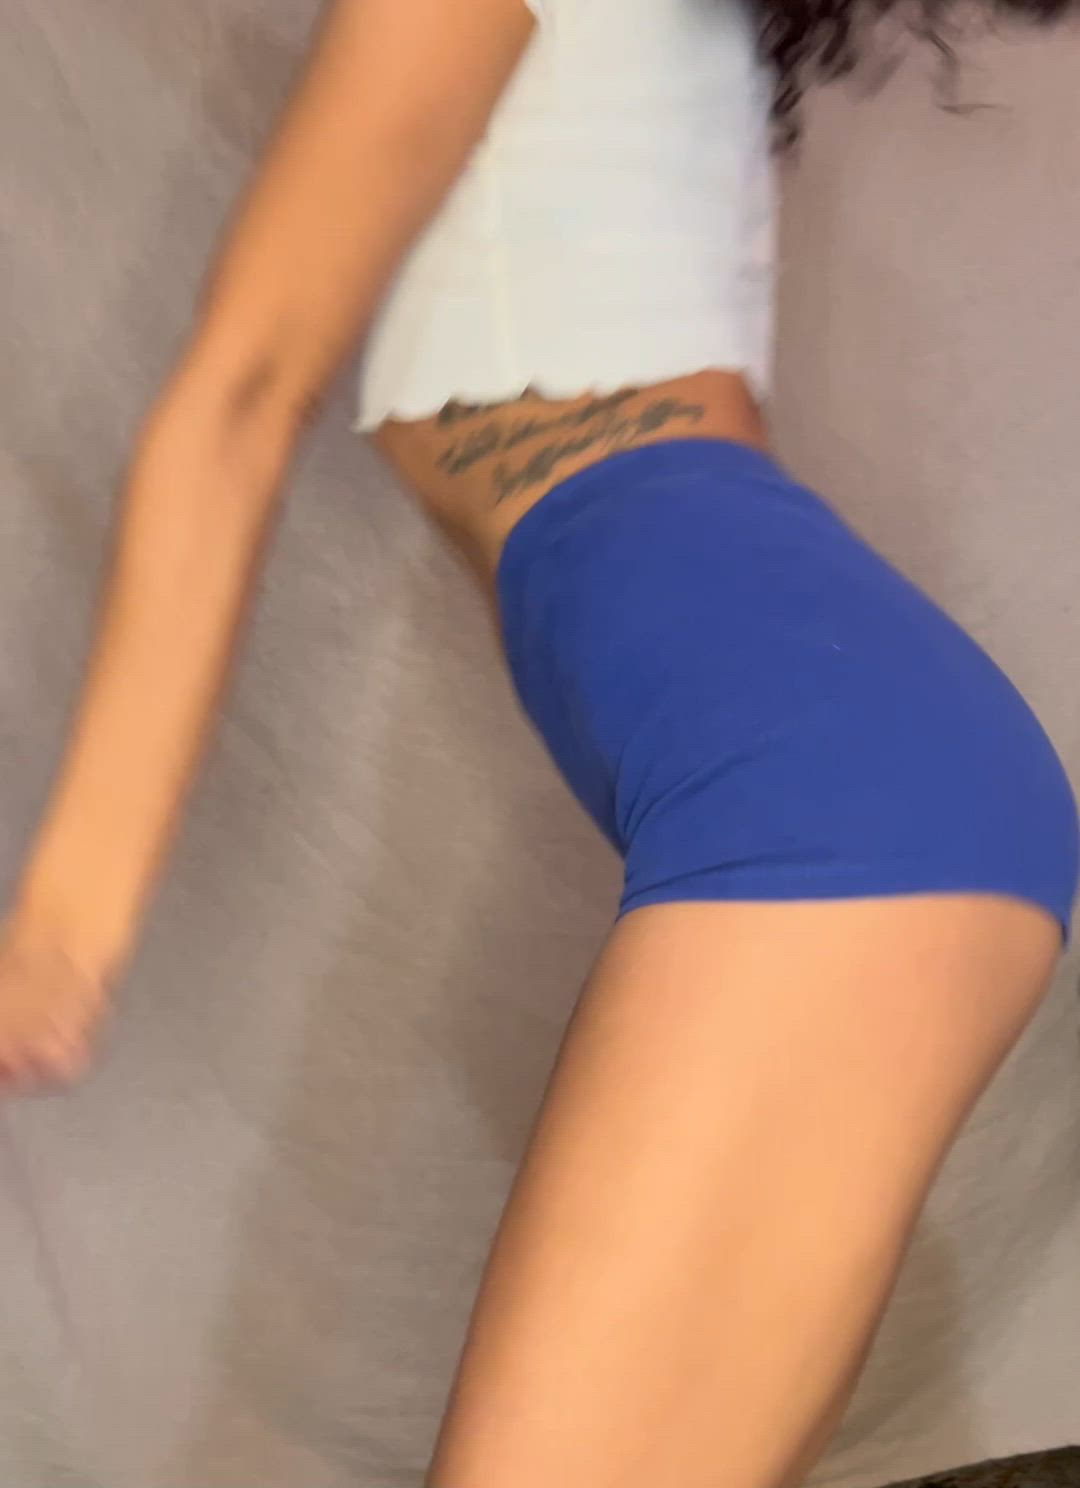 Ass porn video with onlyfans model foxysophie69 <strong>@tiny_sophiefox</strong>